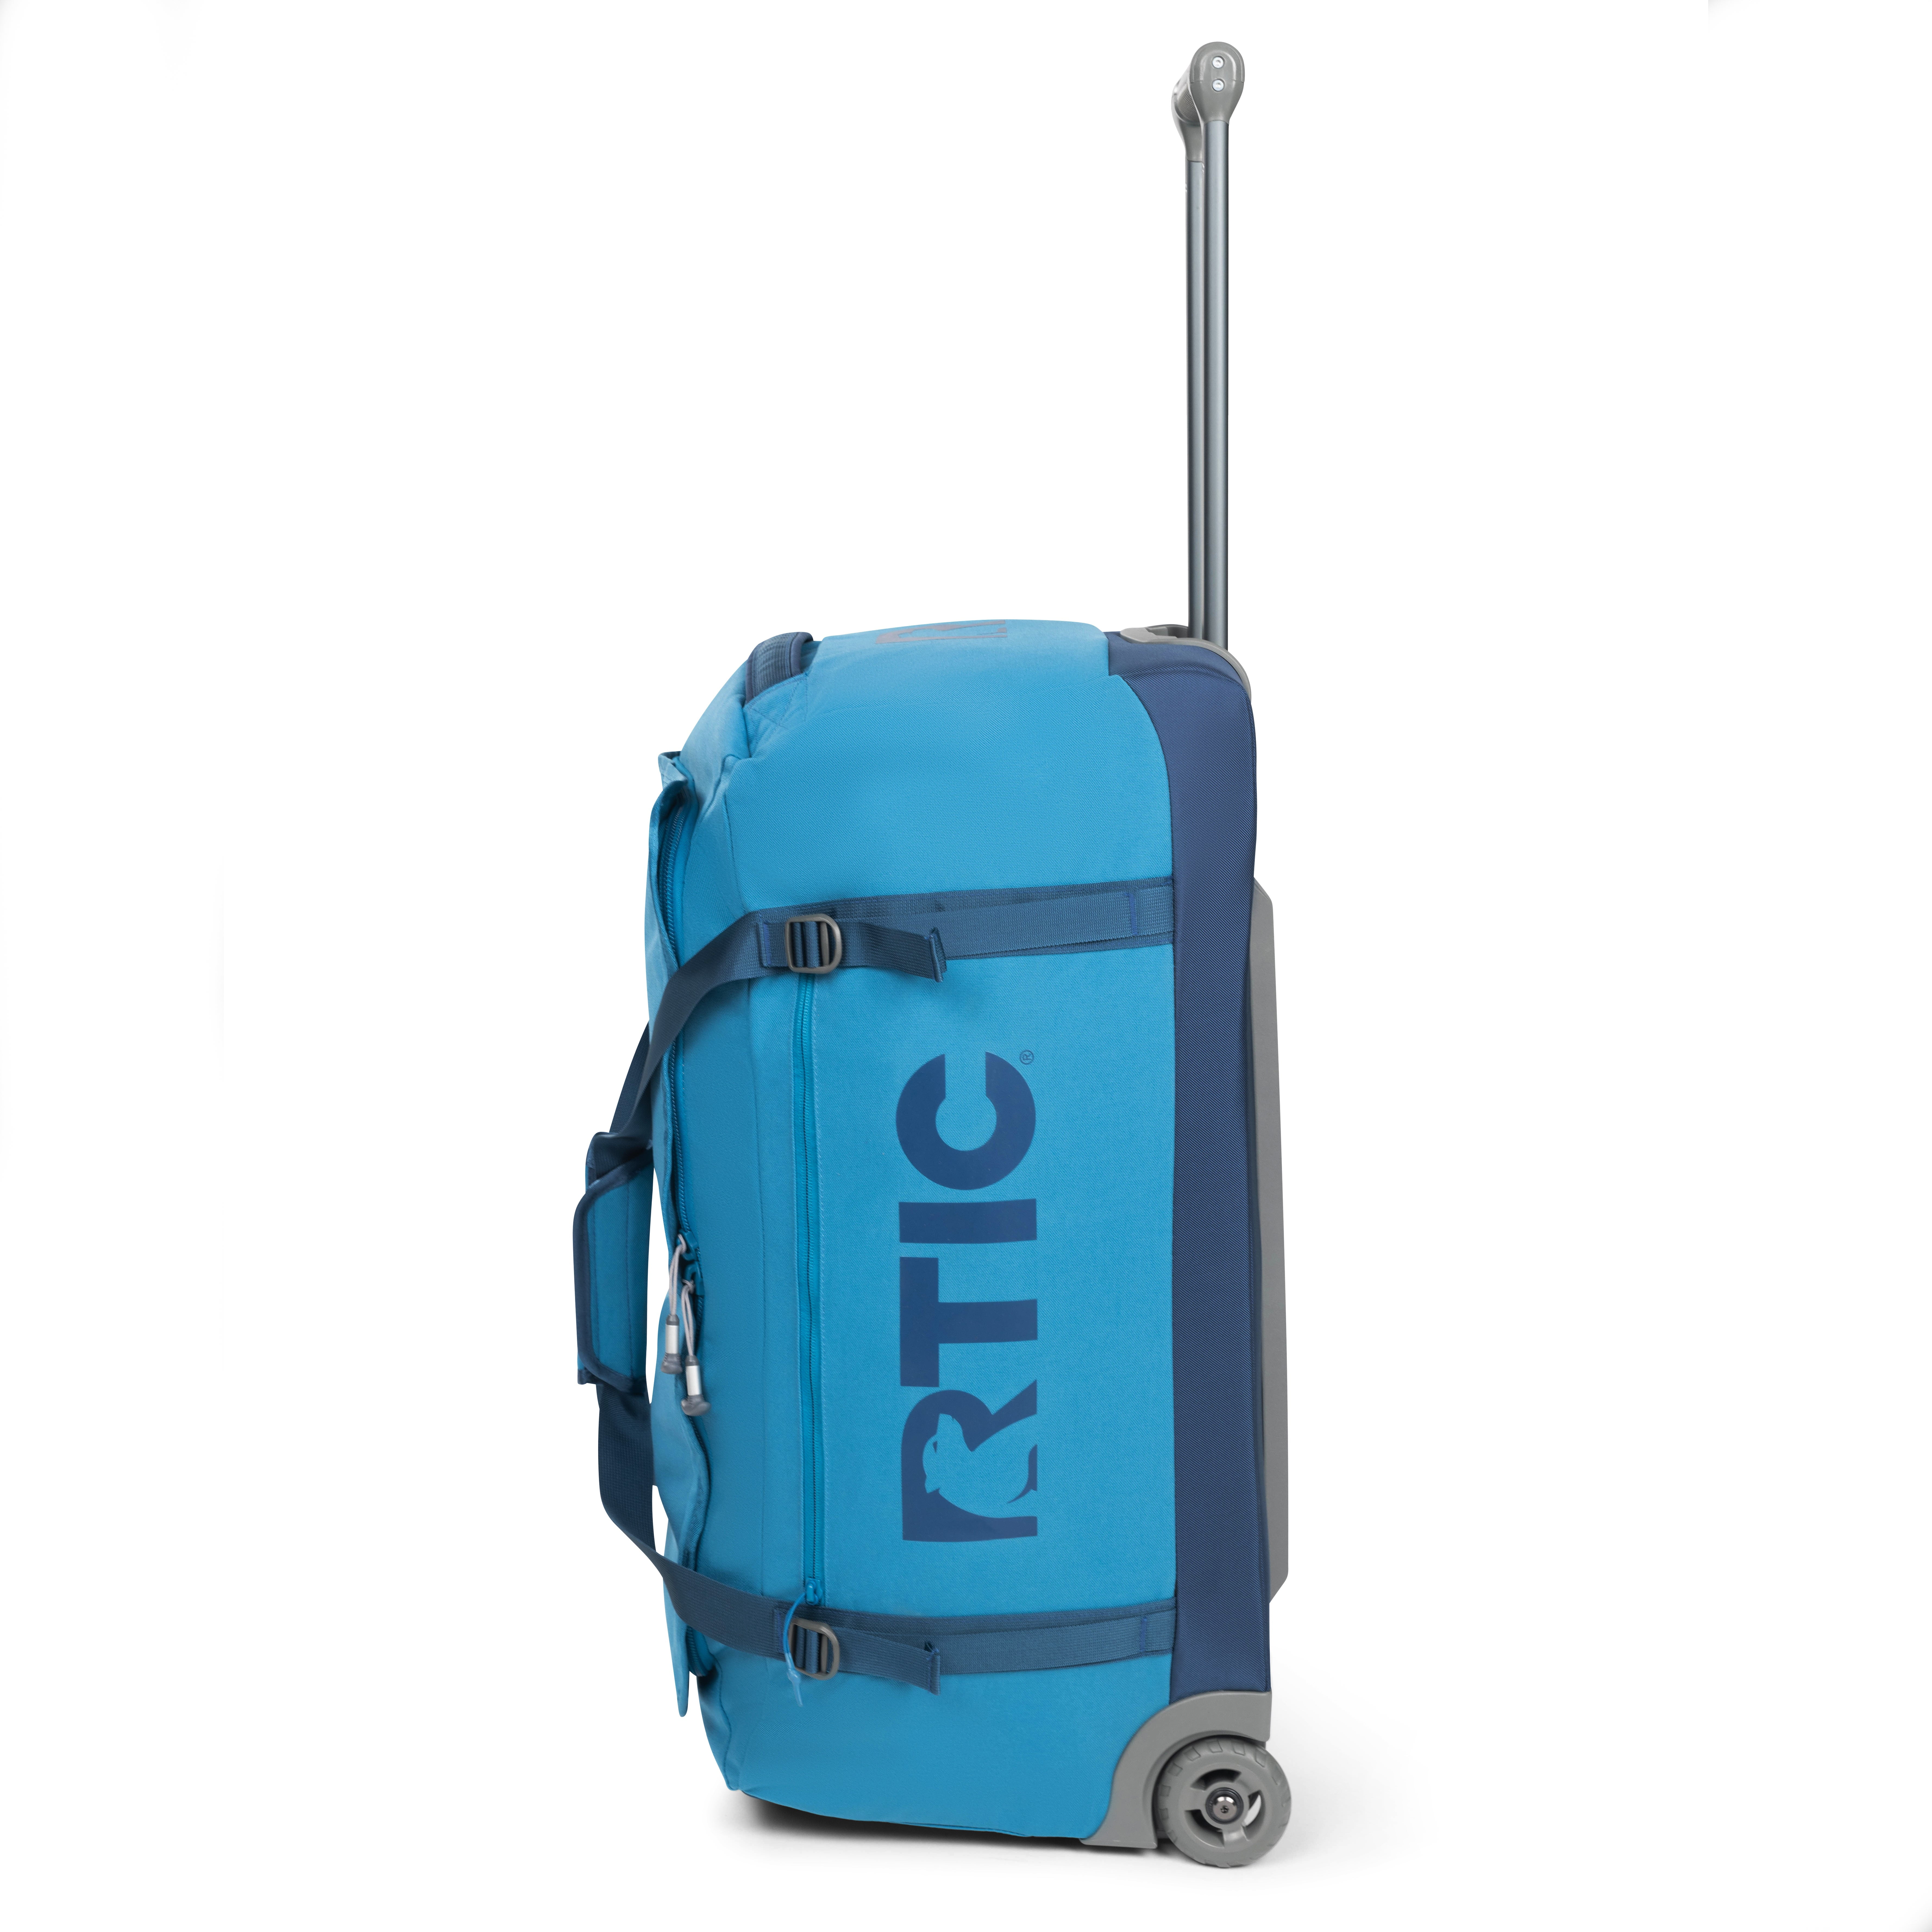 RTIC Road Trip Duffle Bag for Men and Women, Traveling Tote for Camp, Travel, Gym, Weekender, Camping, Overnight, Carry On, Sports, Spacious, Water